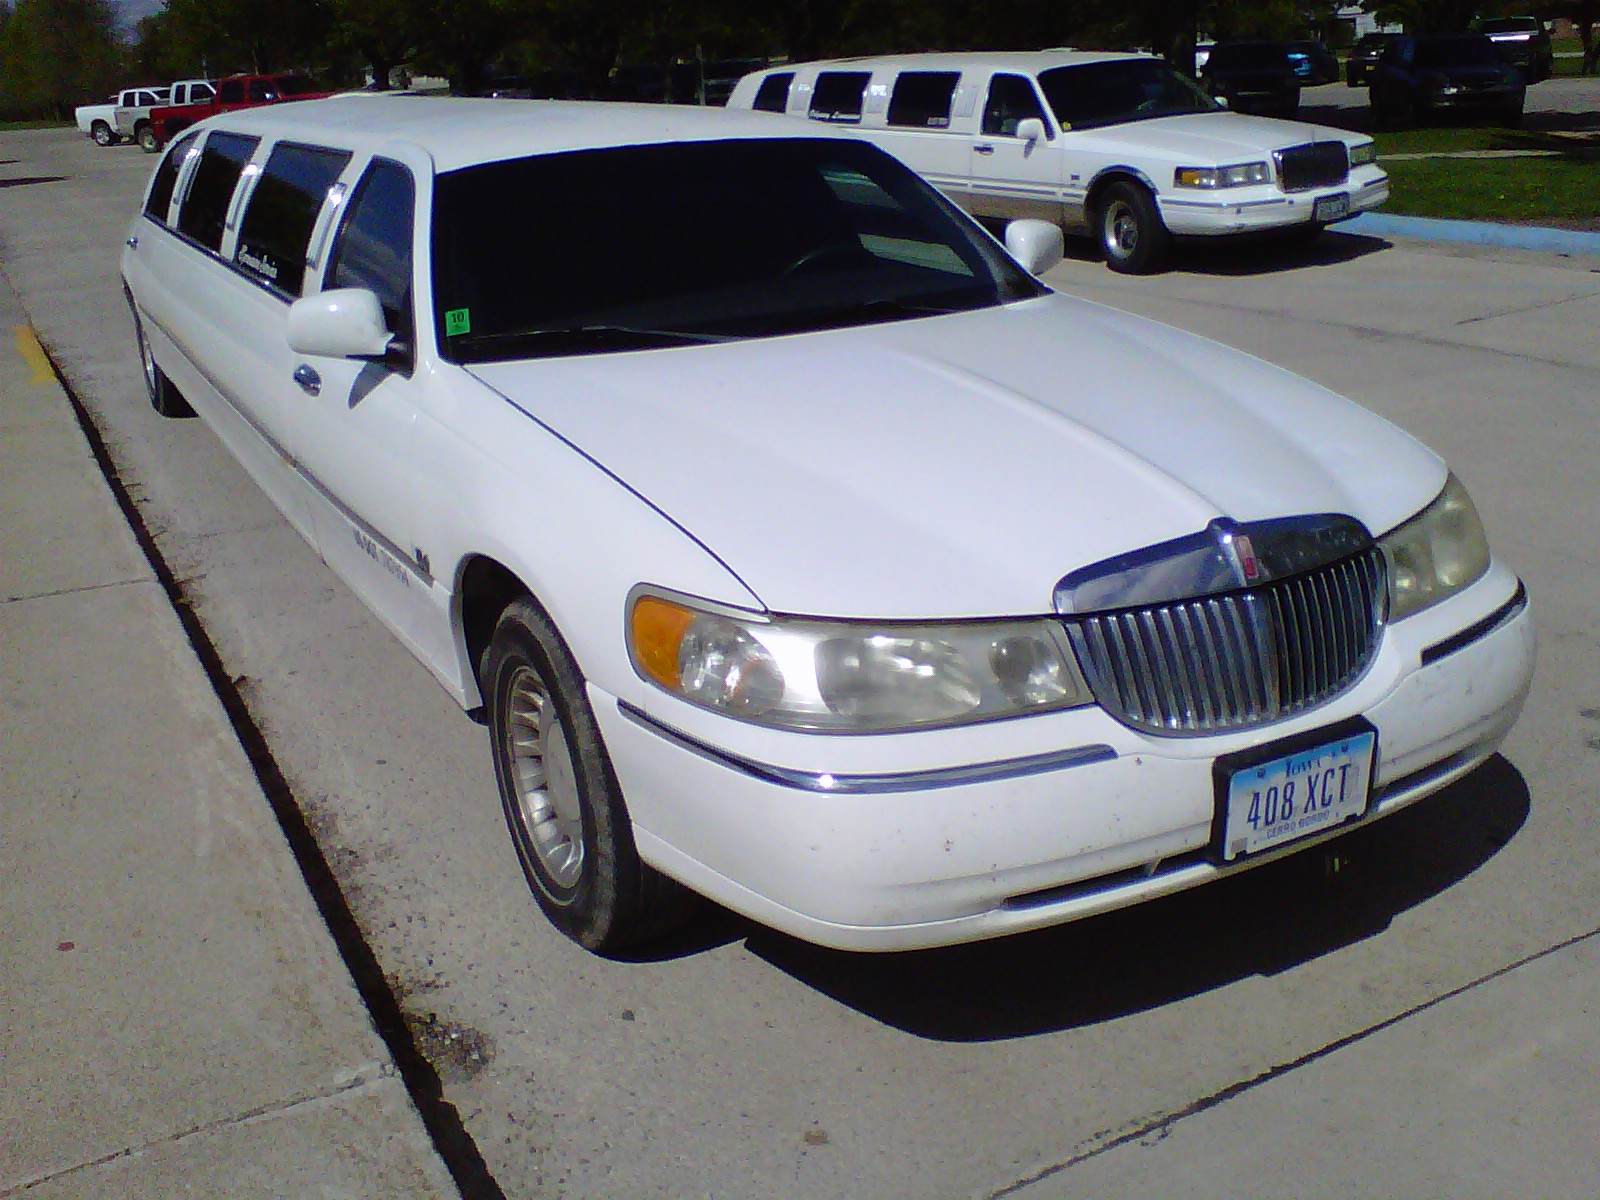 a white limousine parked on the curb near other cars